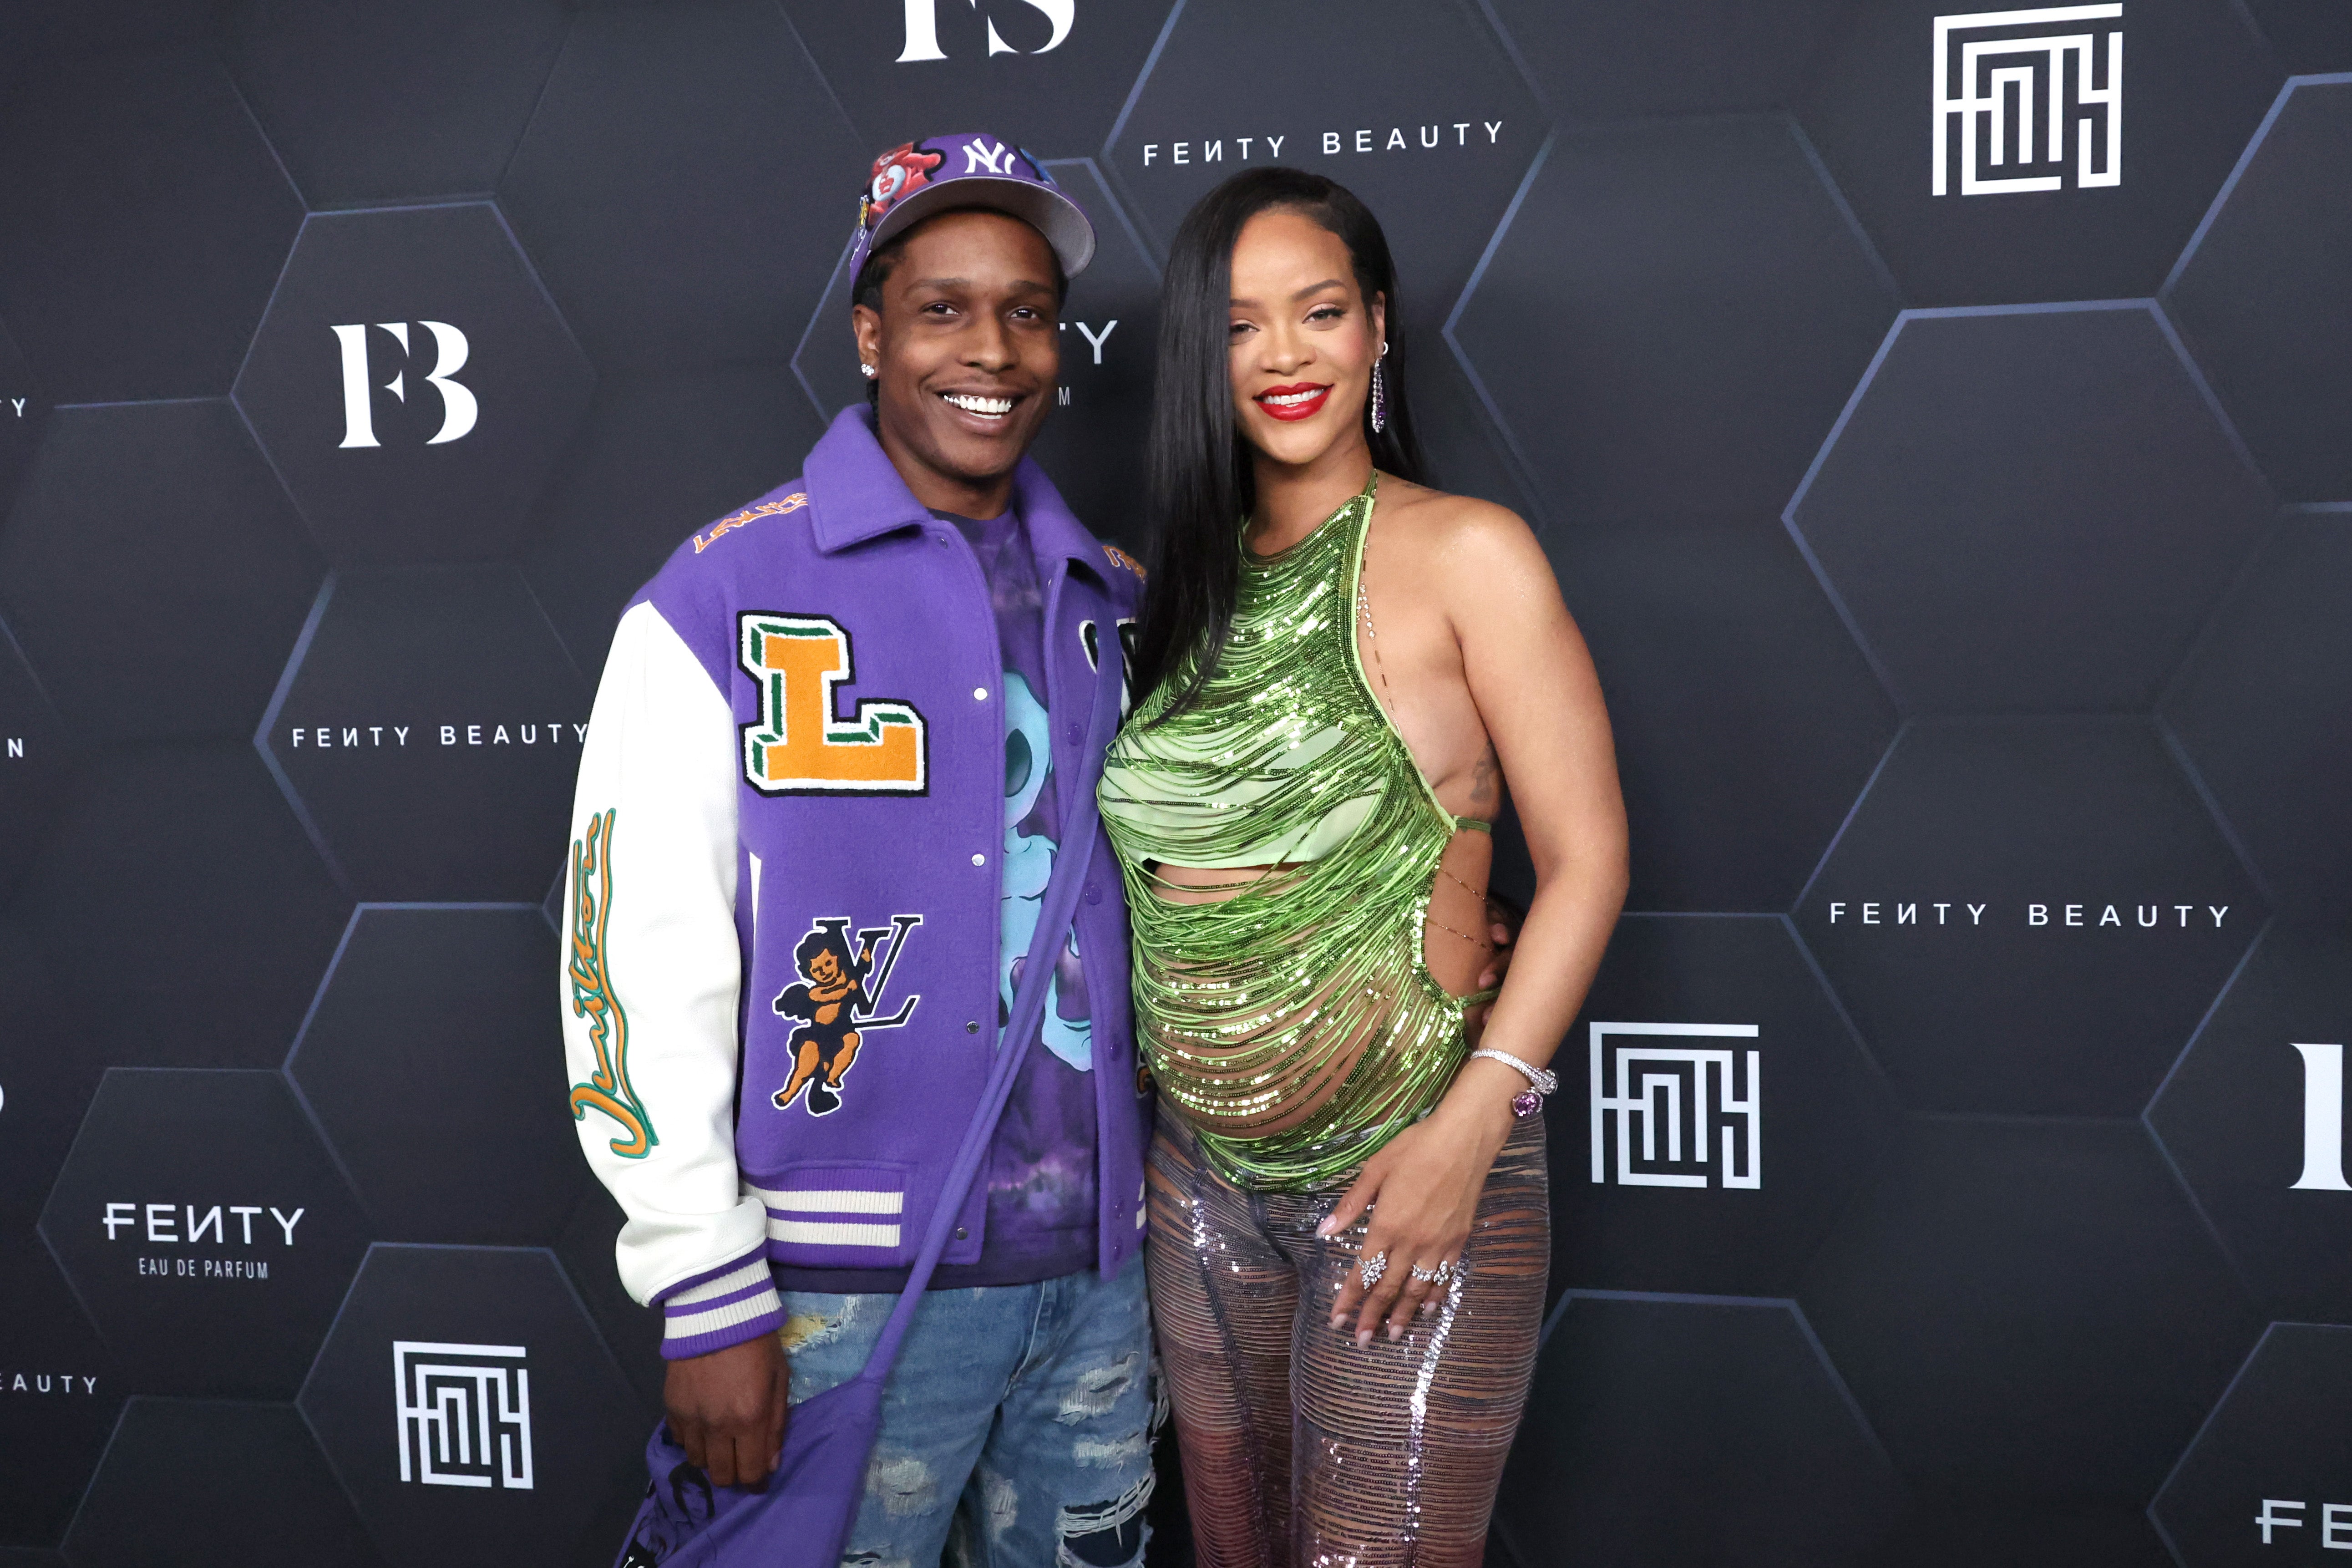 Rihanna have birth to a baby son in May 2022 with boyfriend ASAP Rocky